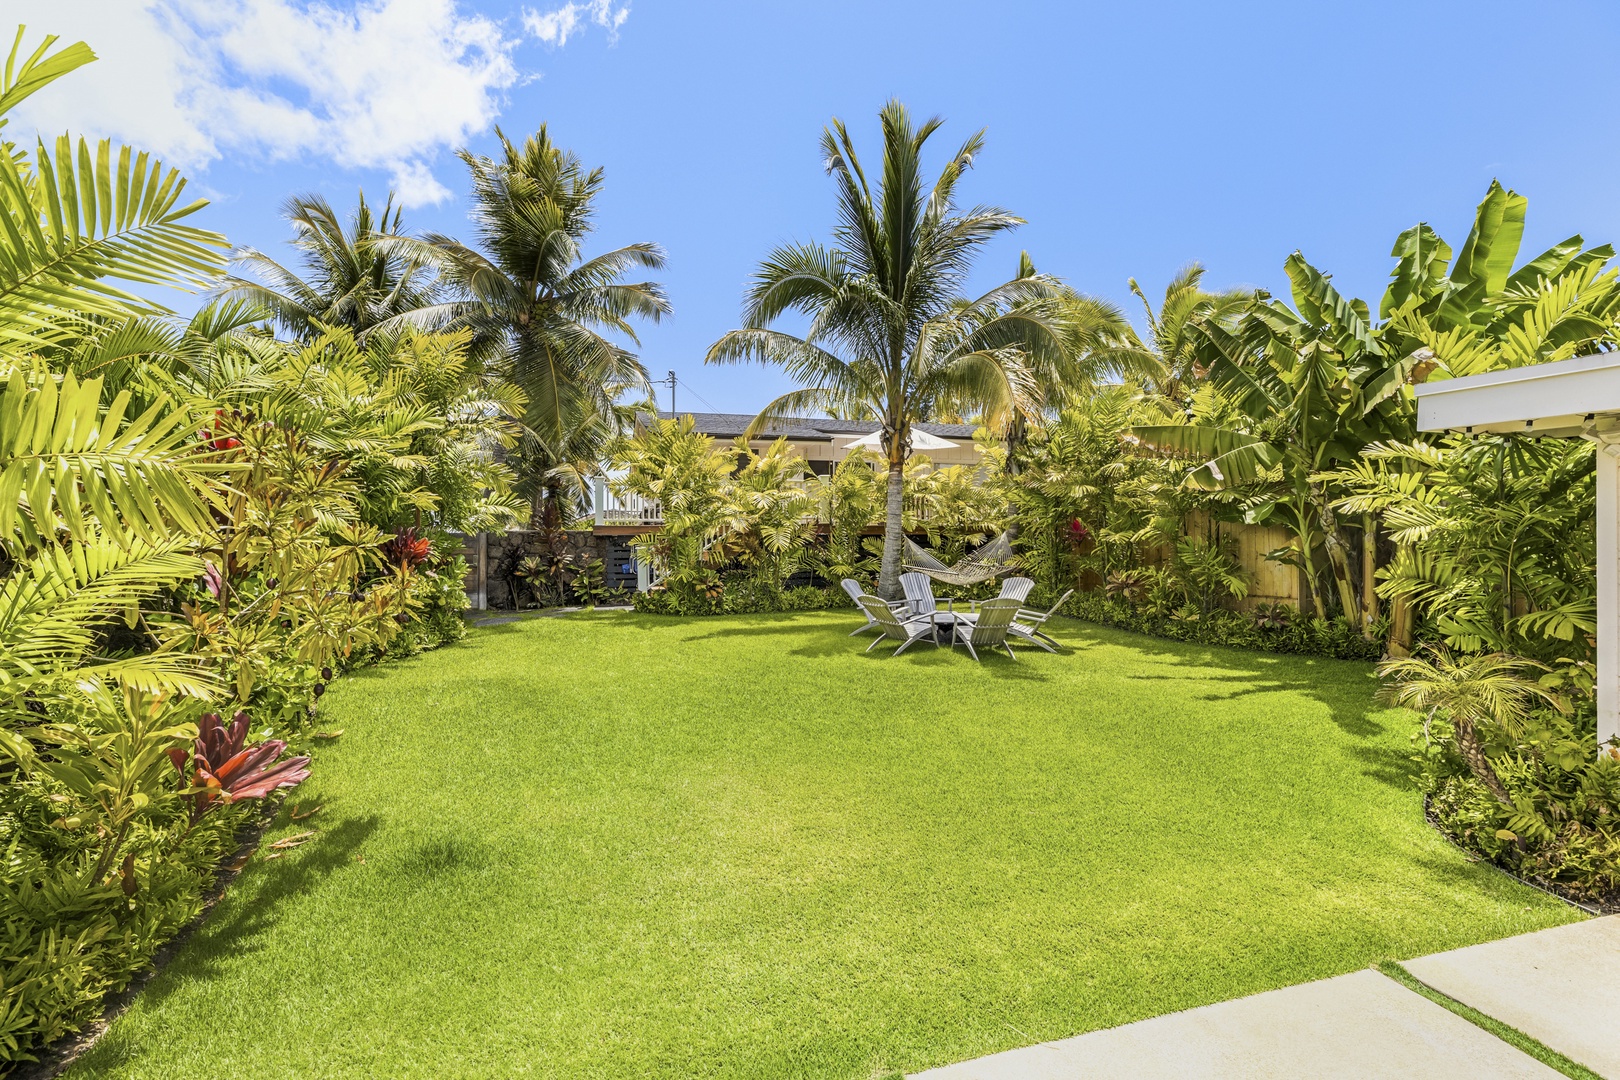 Kailua Vacation Rentals, Seahorse Beach House - Fully Fenced Yard and Gated Driveway